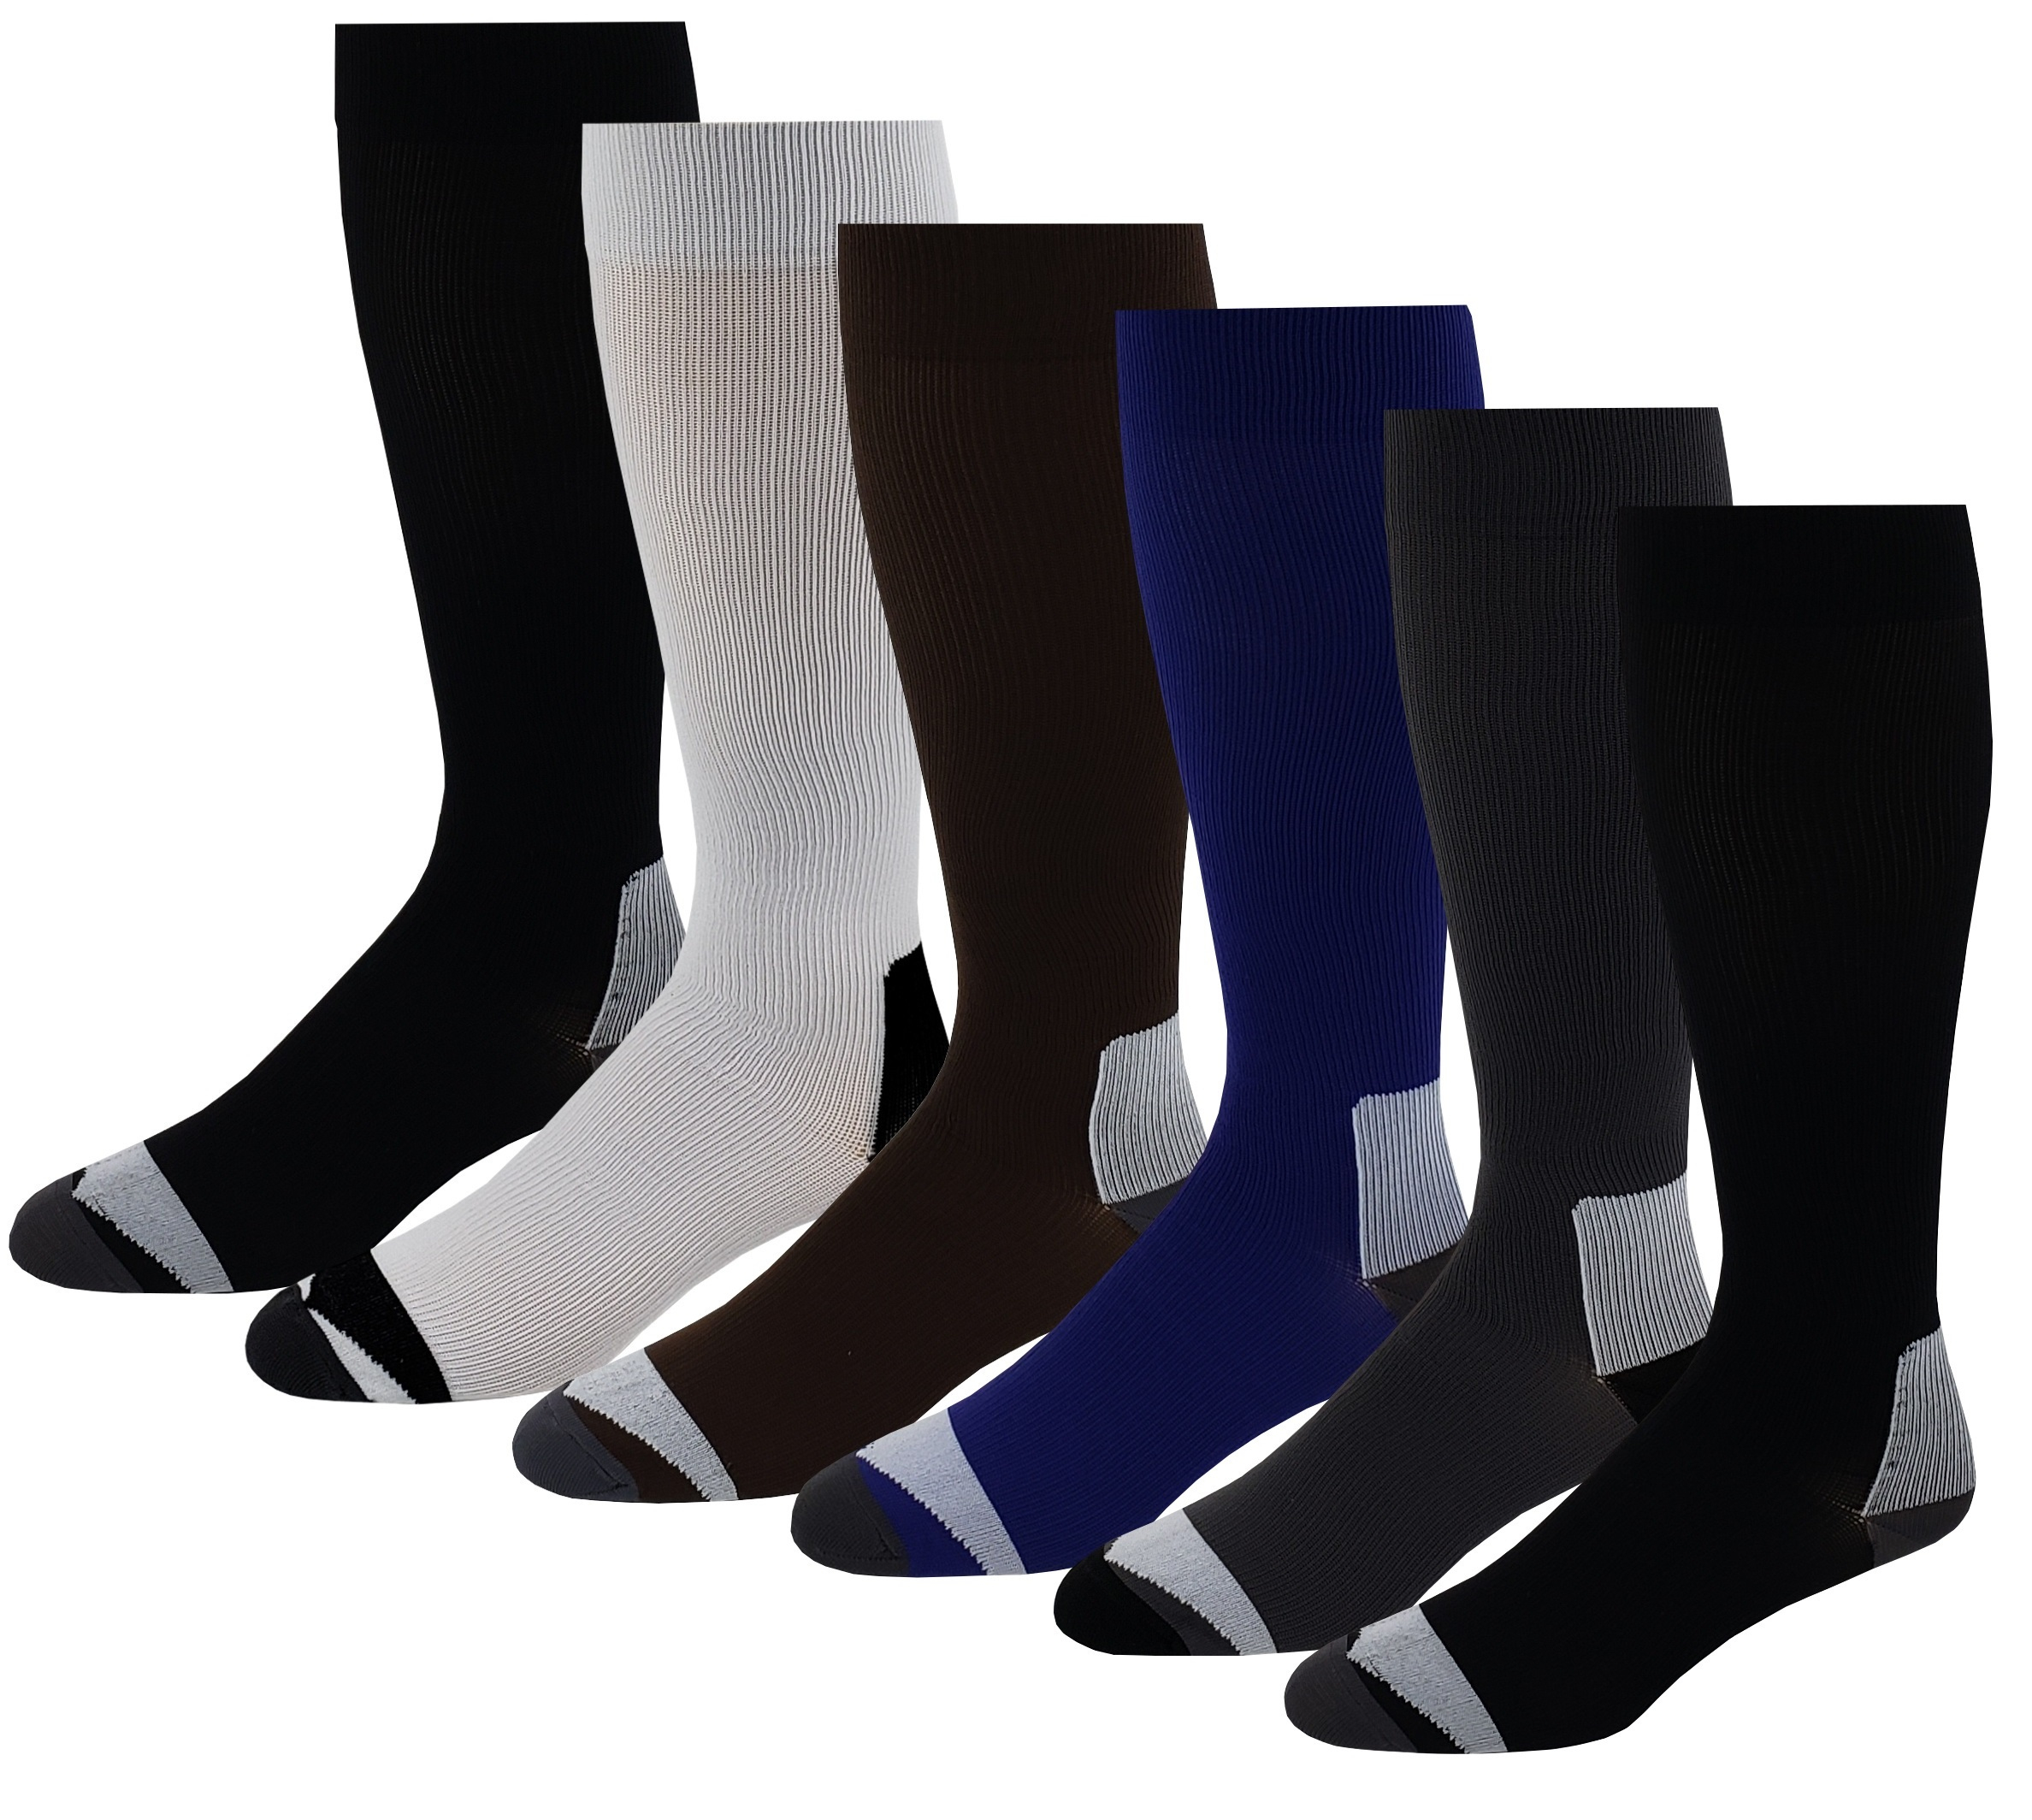 6 Pairs Pack Moderate ( 15-20 Mm Hg ) Sports , Travelers pour Compression Socks Walmart 